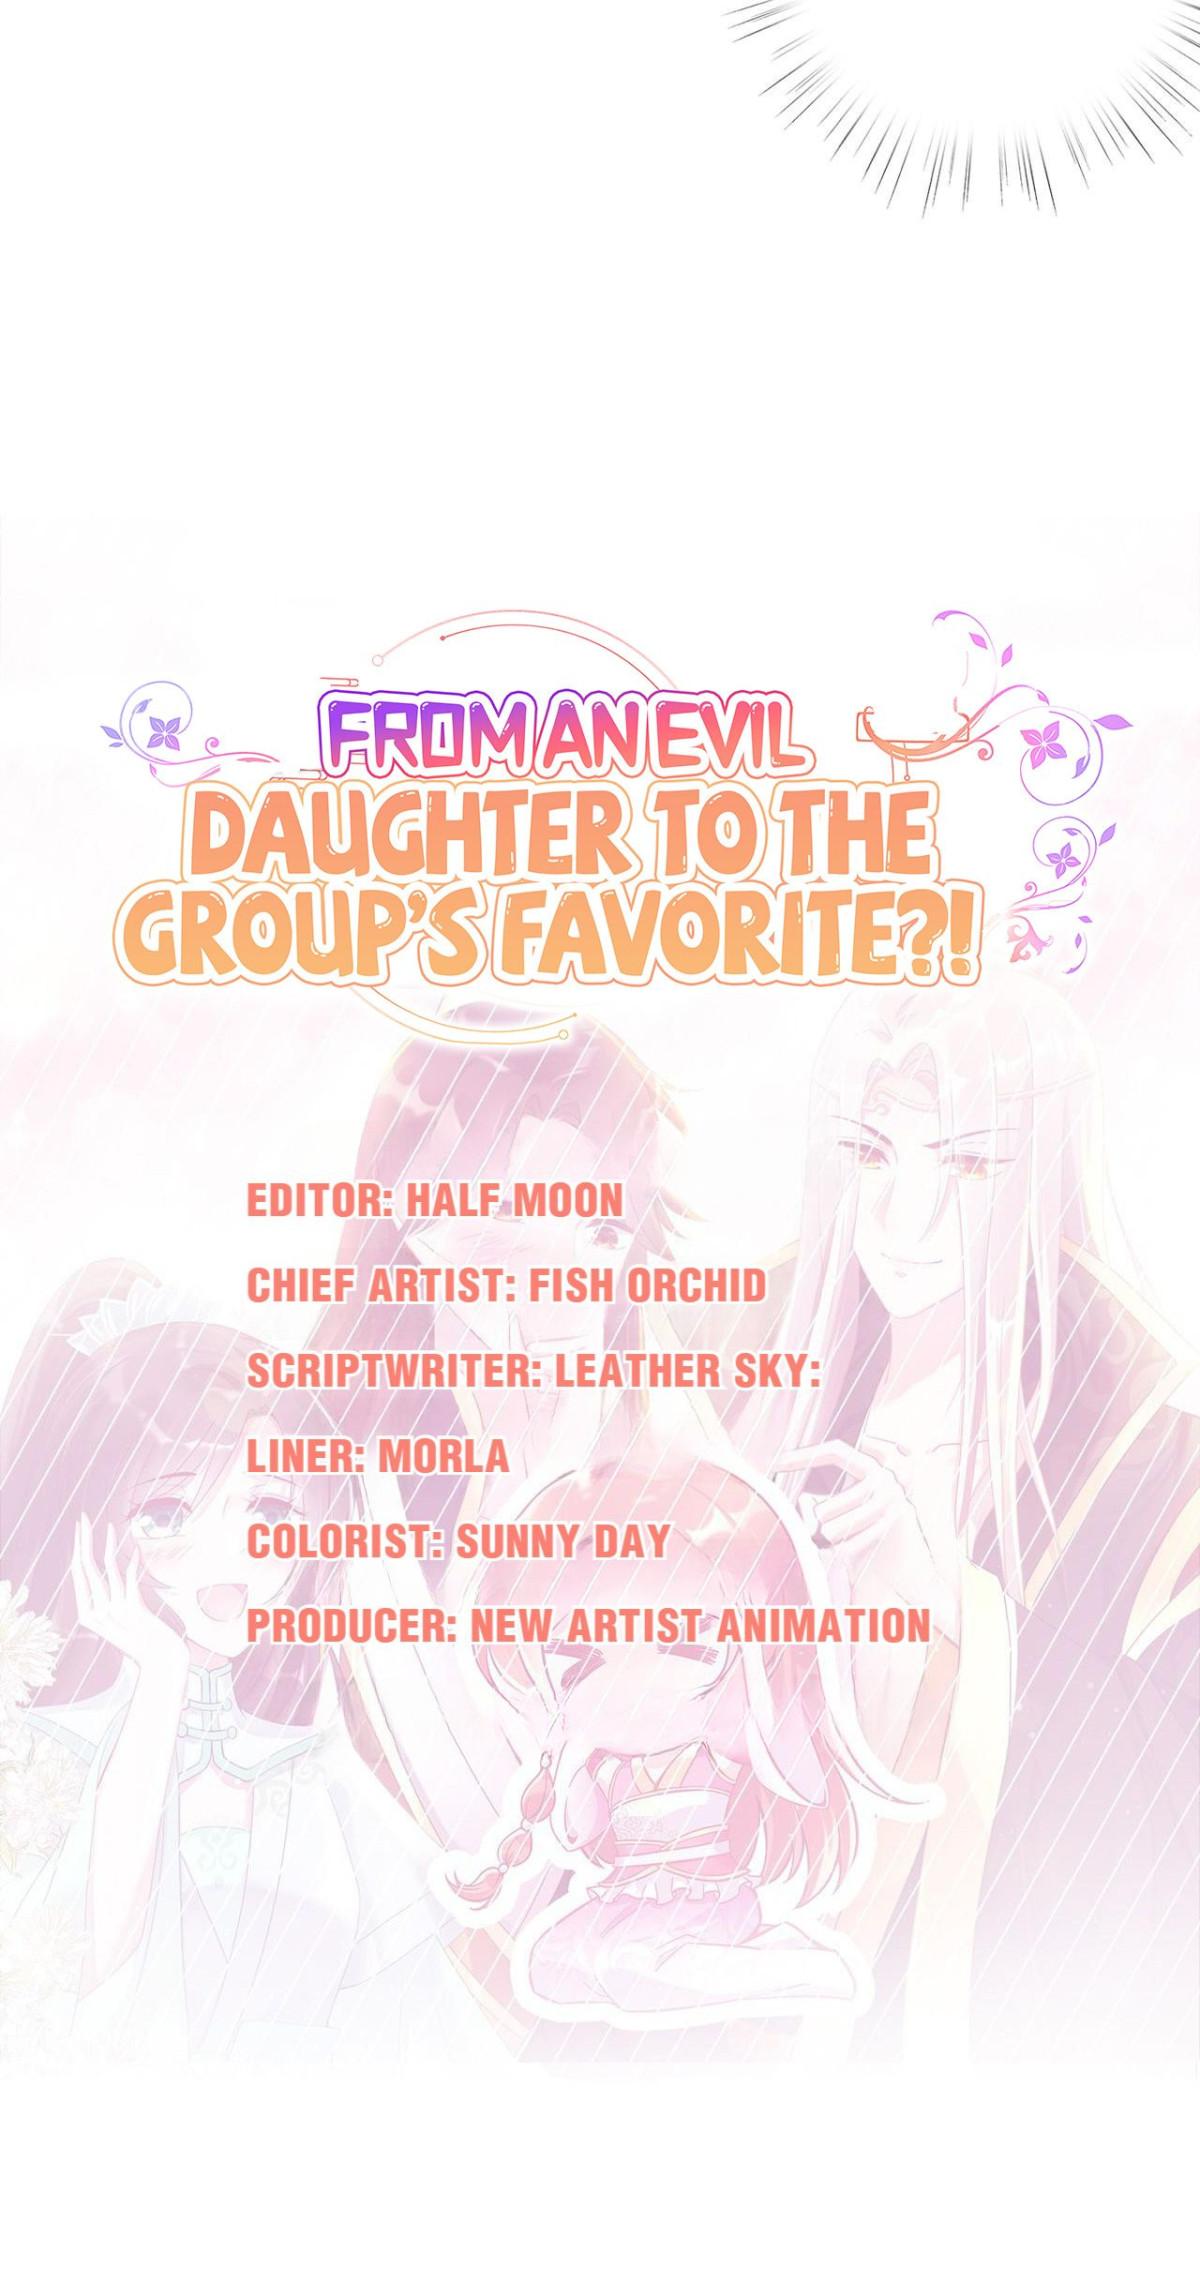 From An Evil Daughter To The Group’S Favorite?! - Page 3